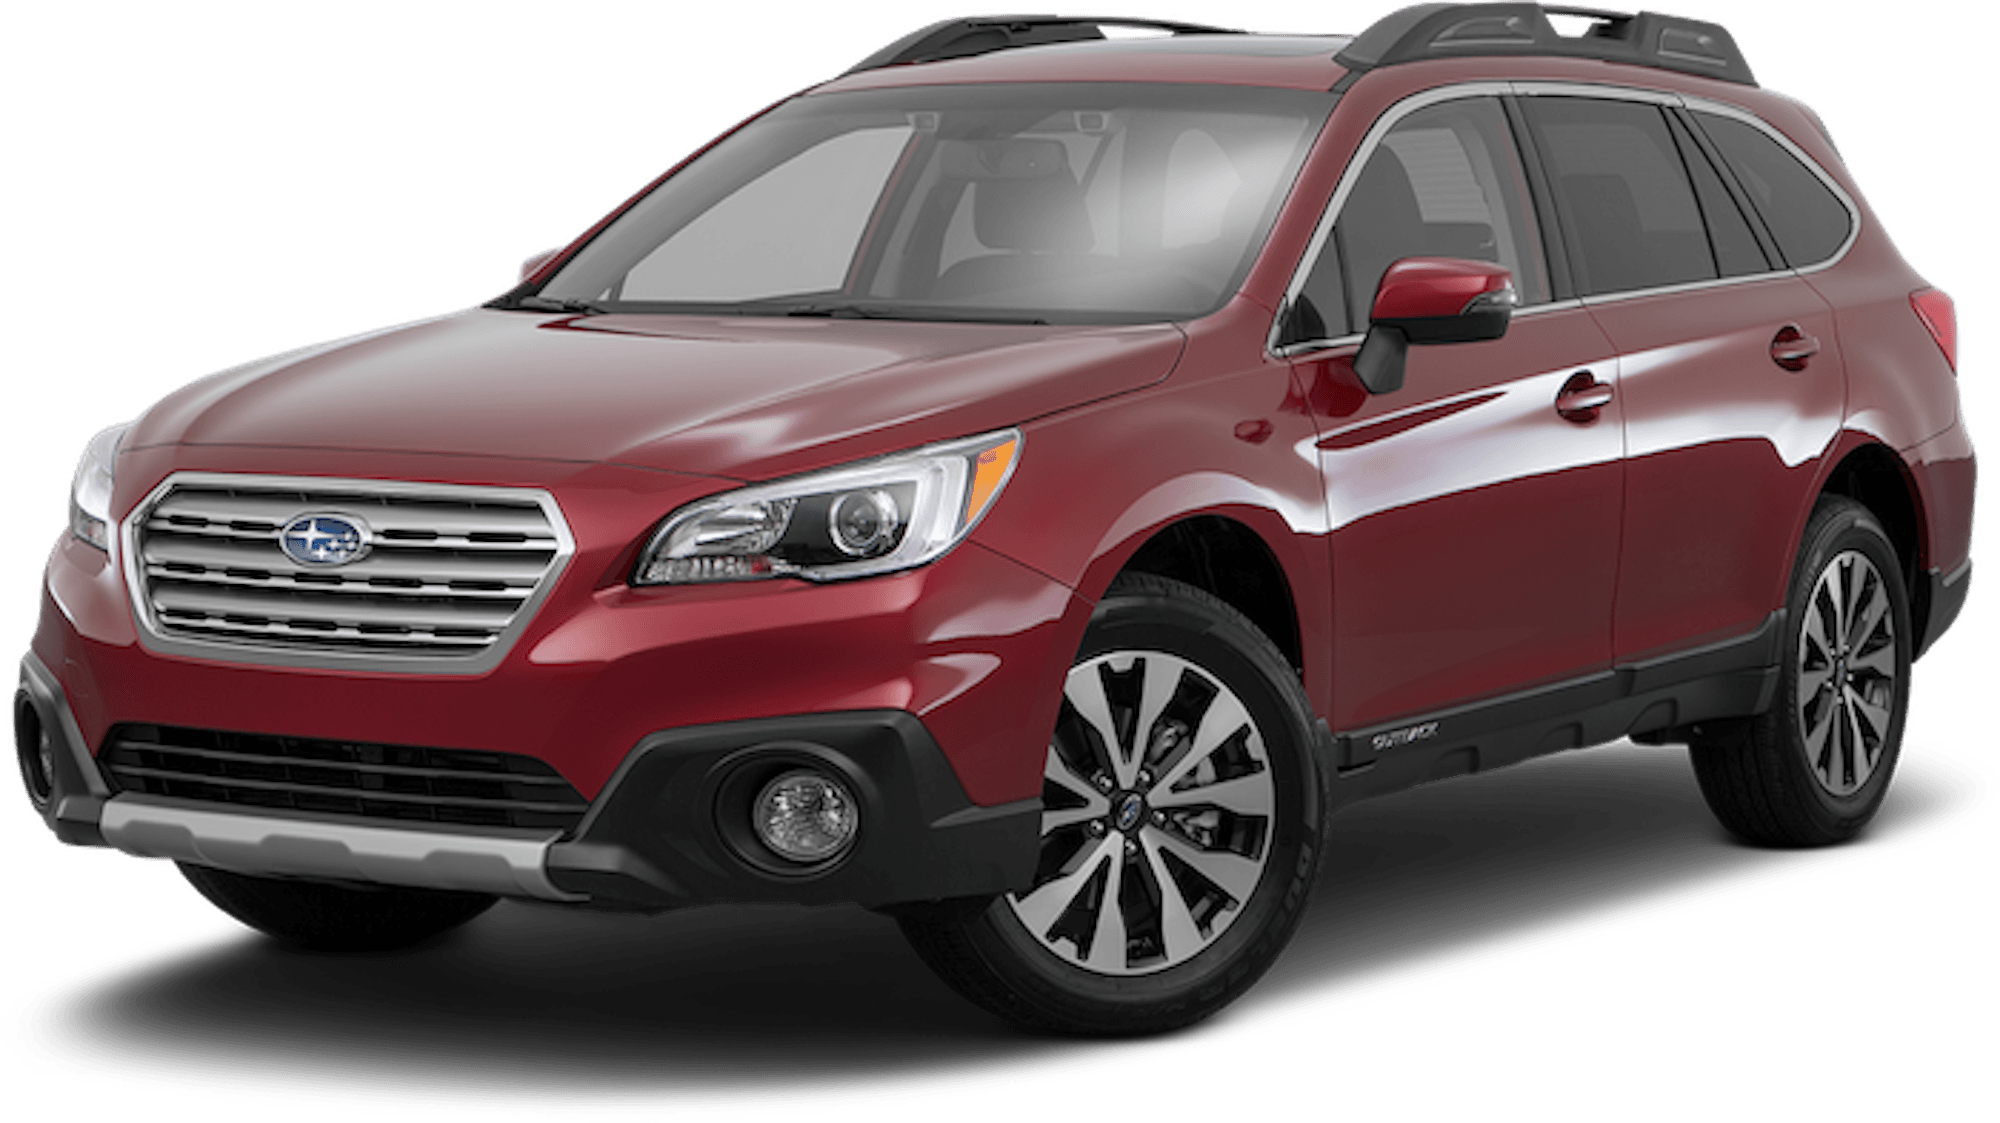 Find your best Subaru finance rate with Driva